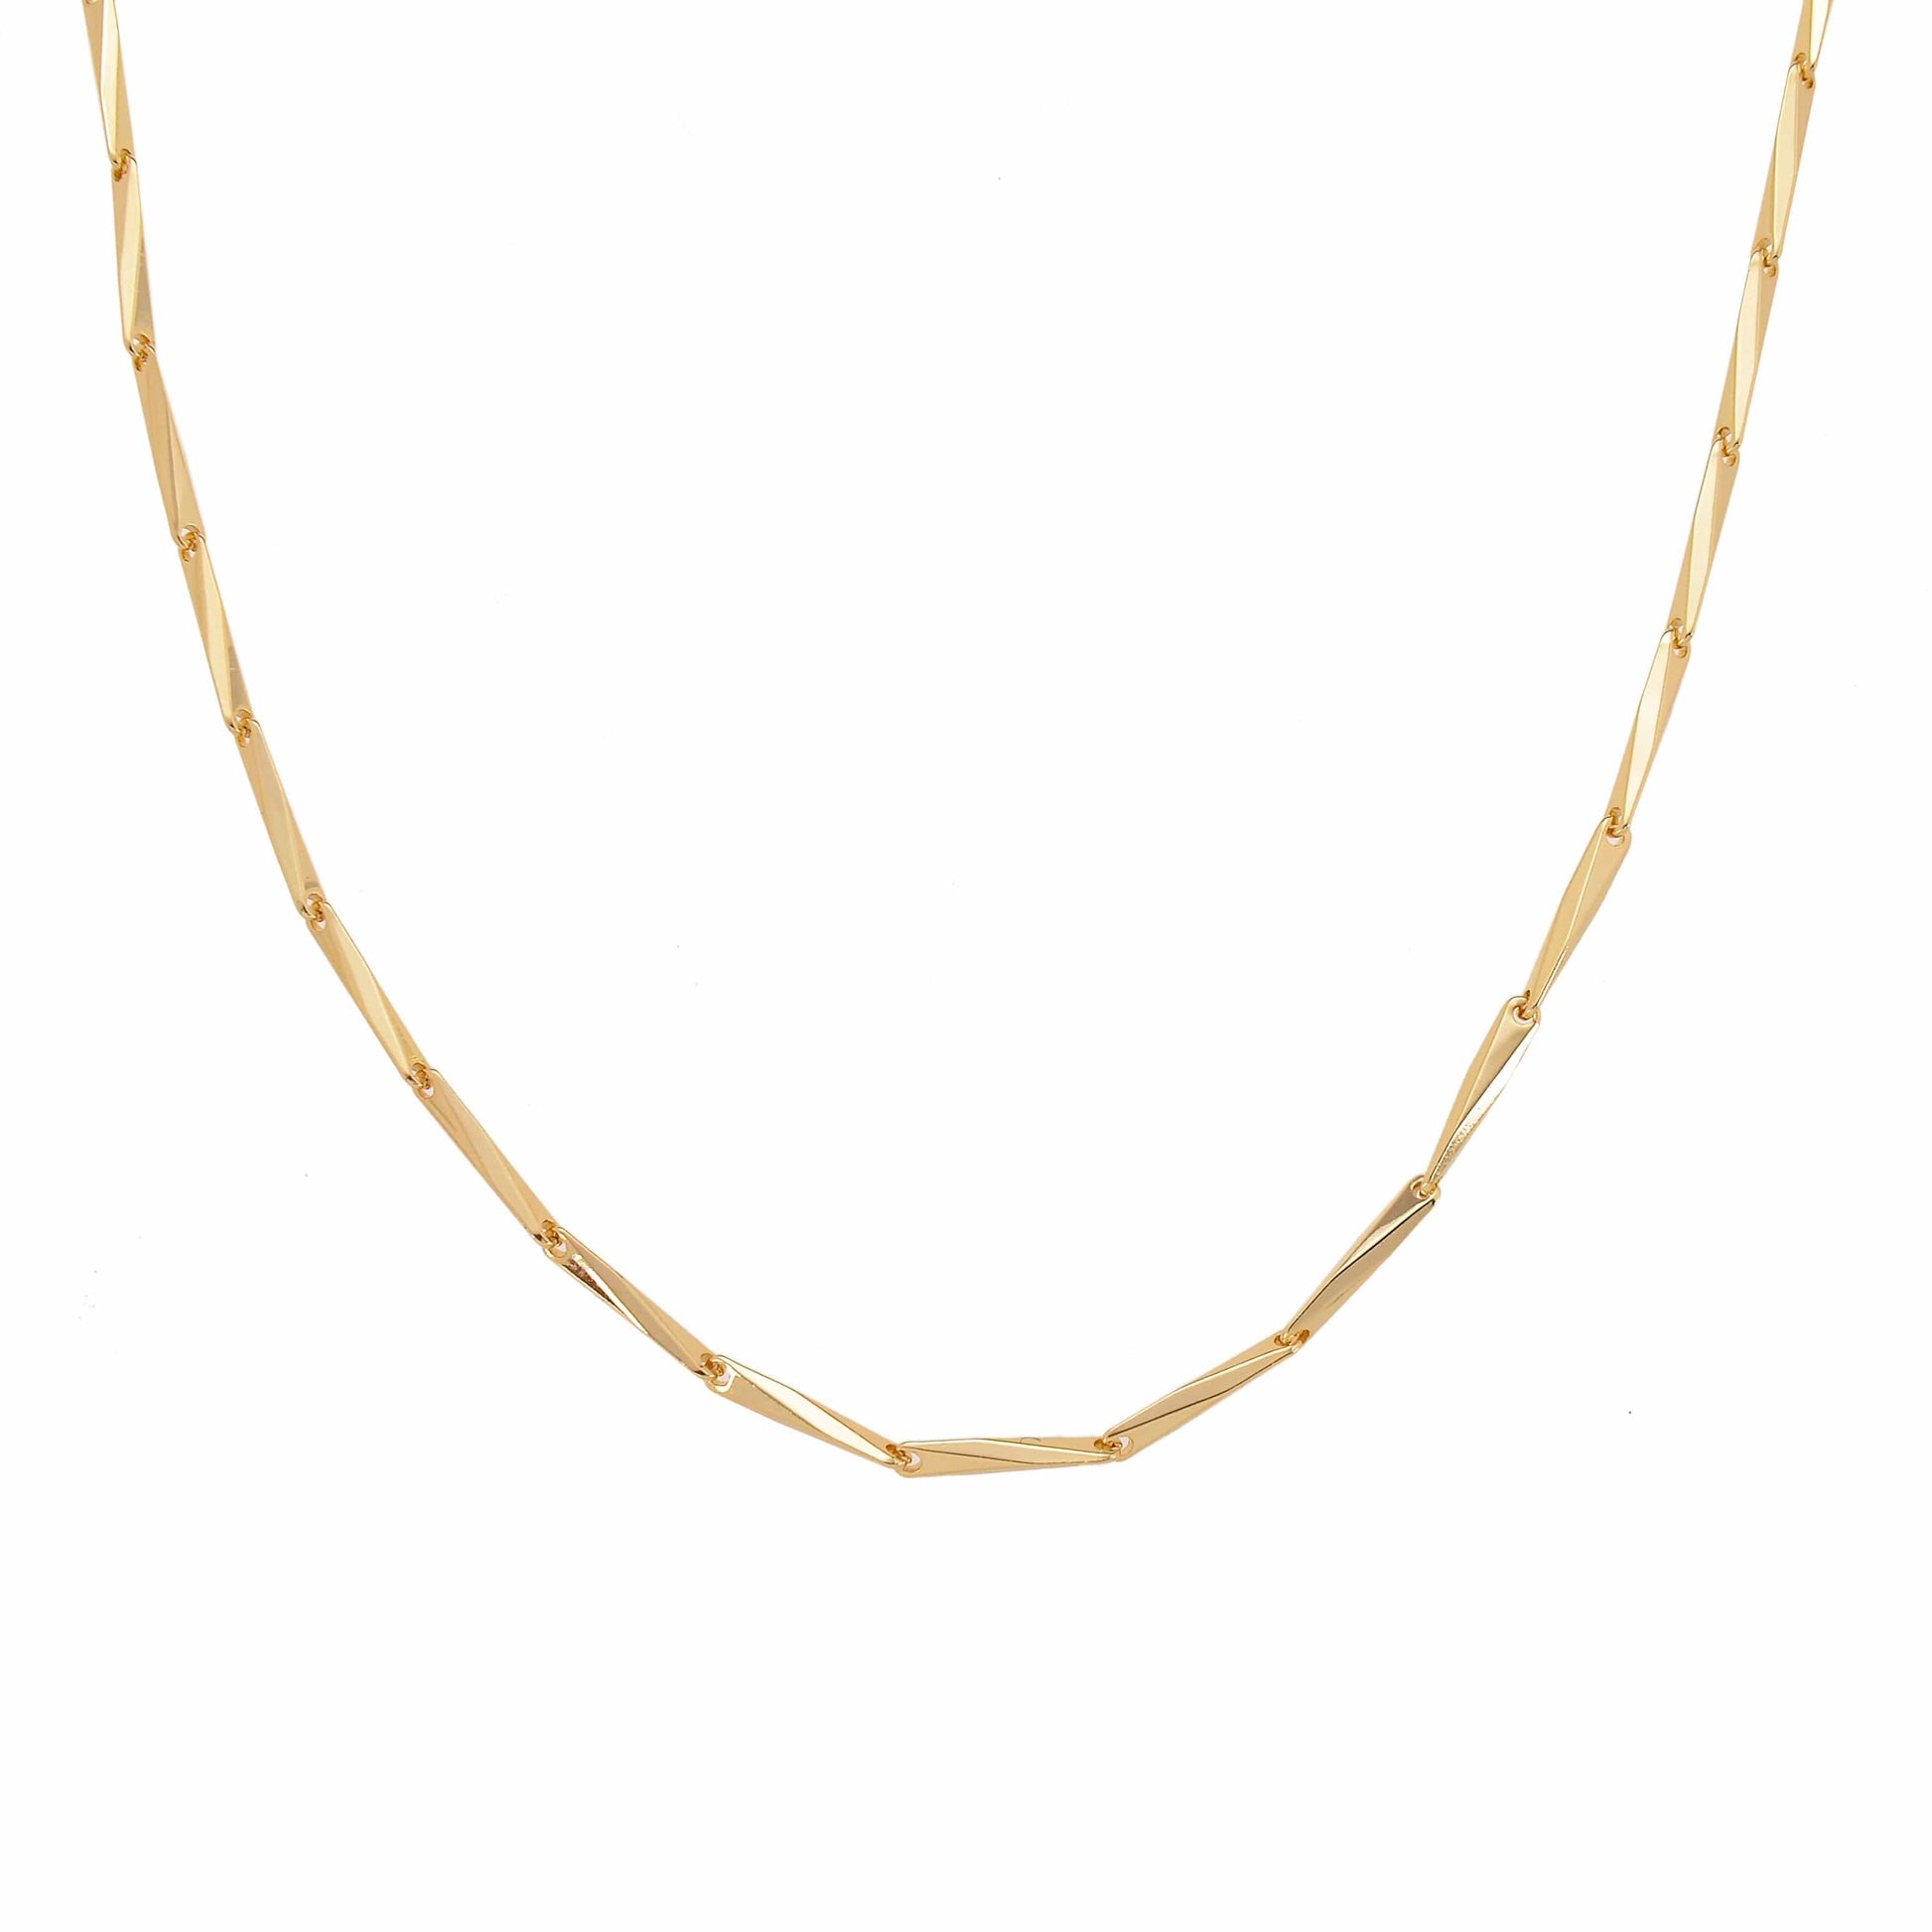 Parisian gold layering 19 inches necklace